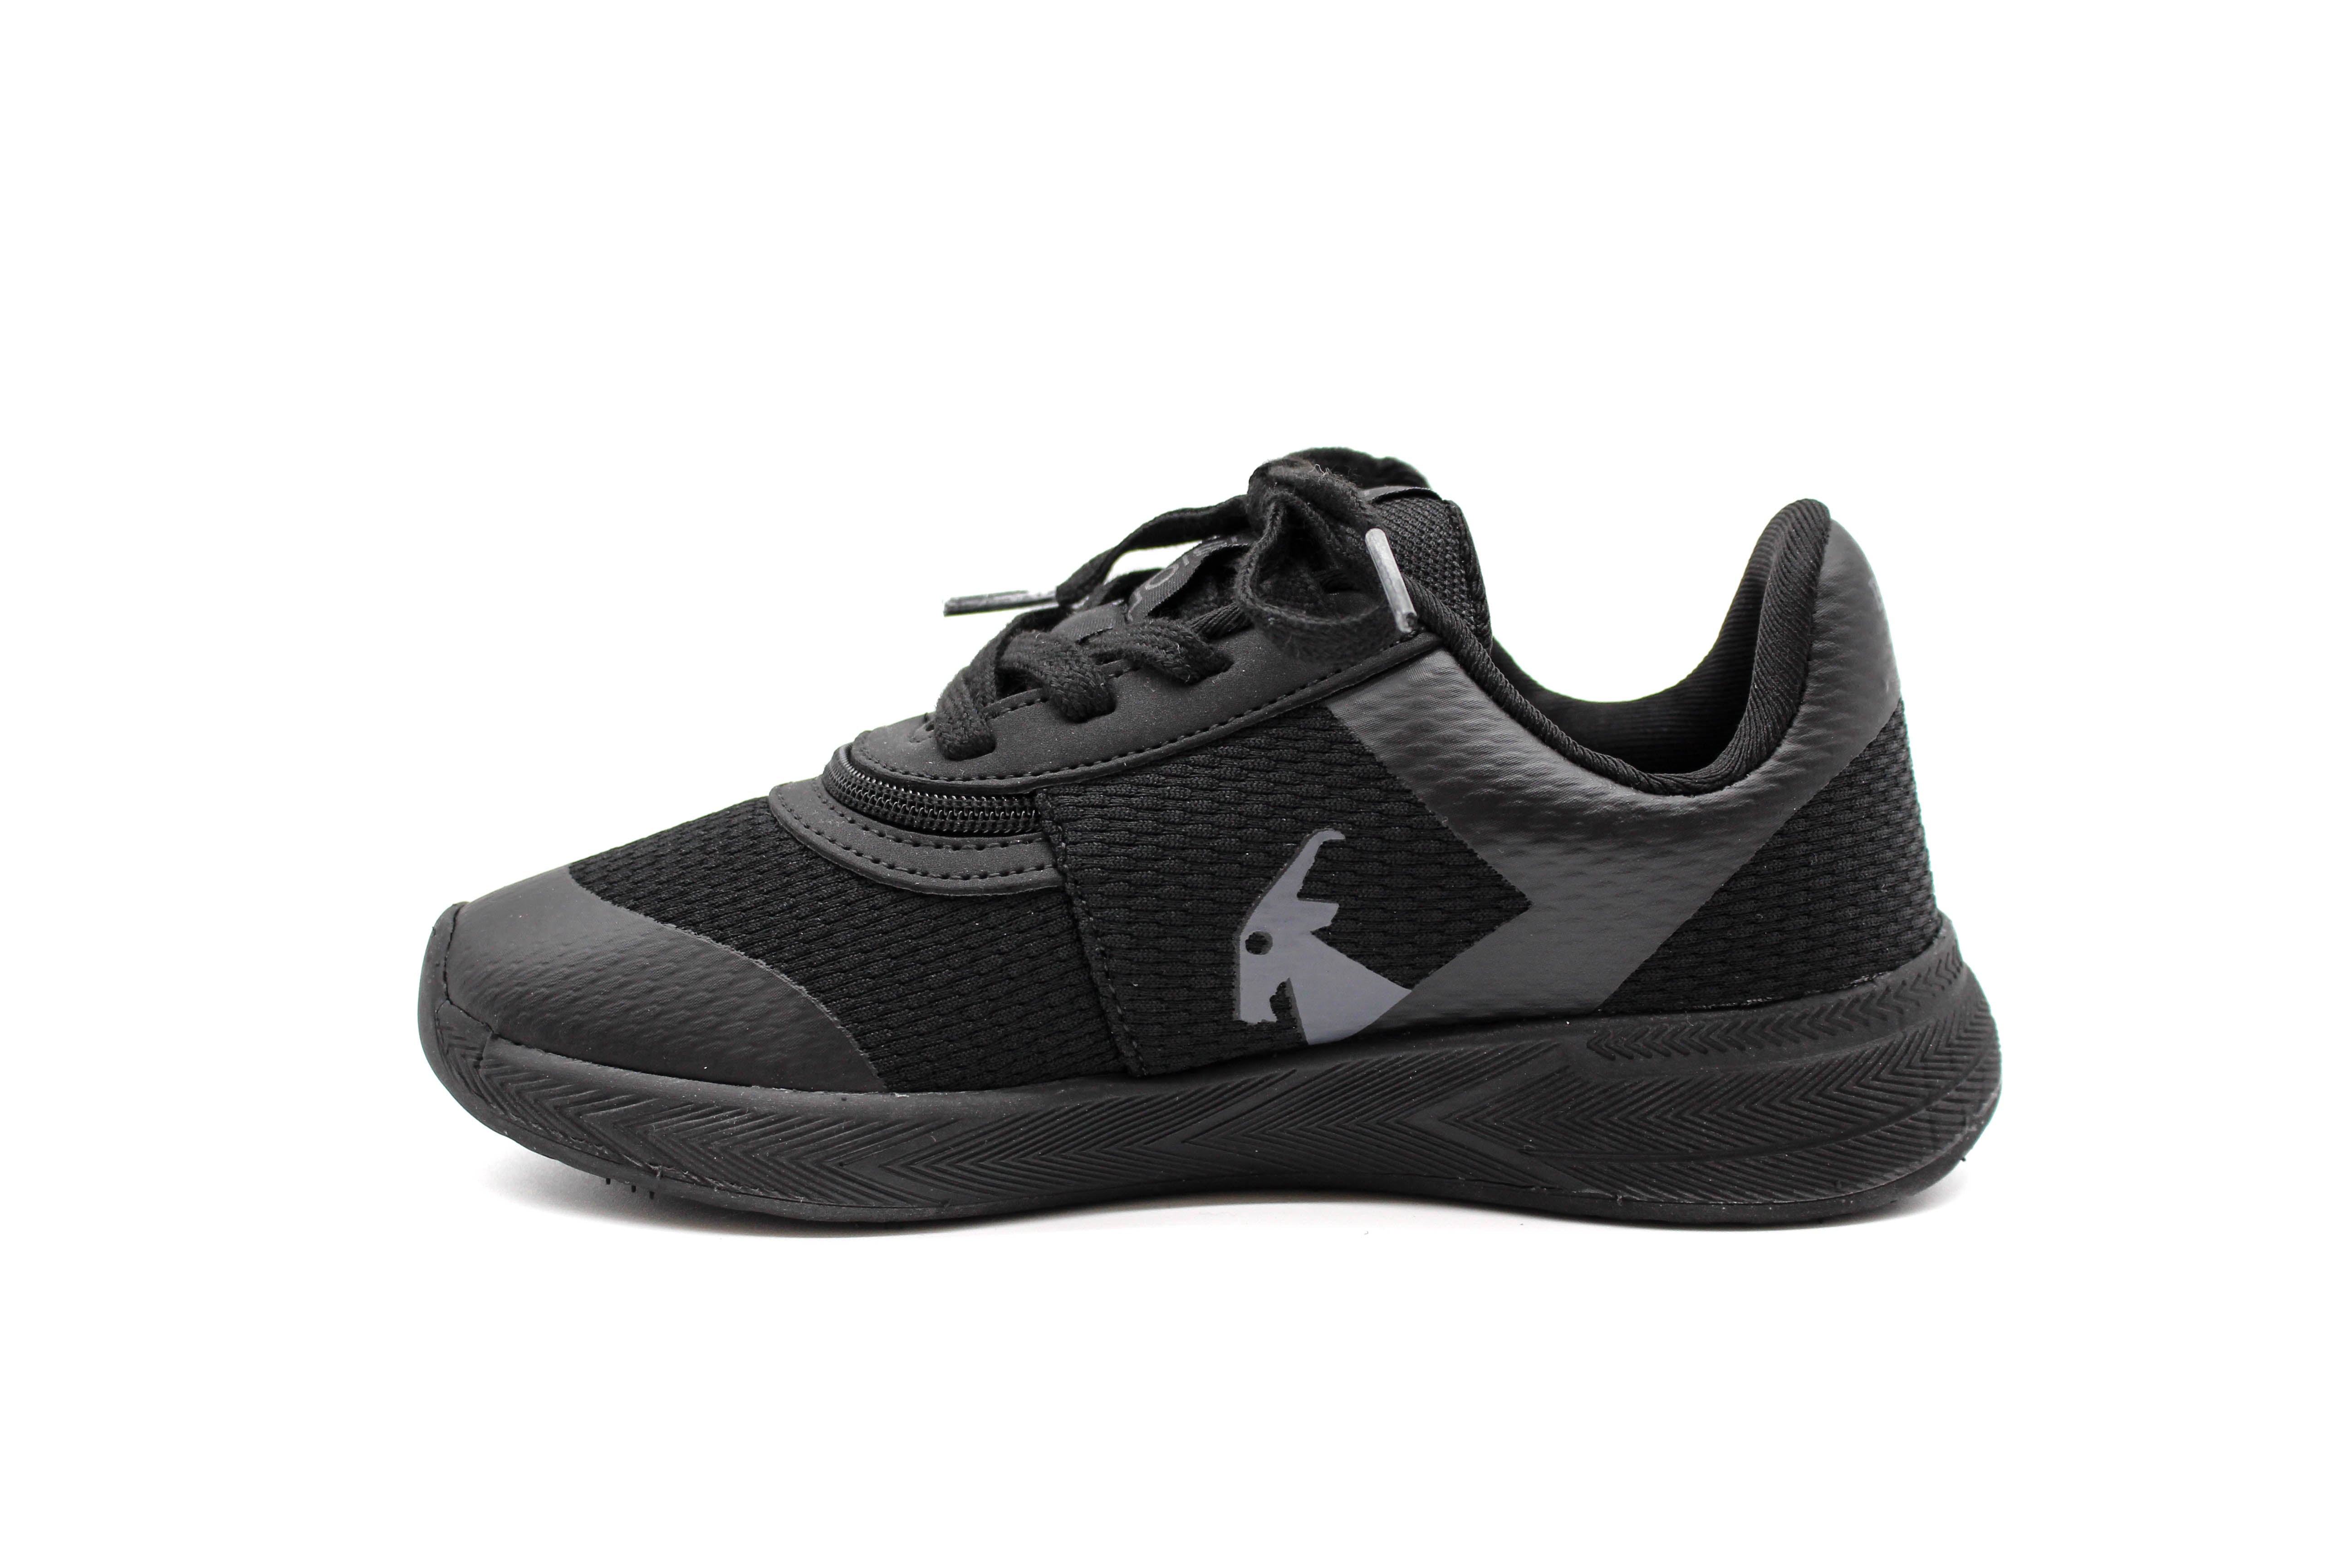 BILLY Black to the Floor Sport Inclusion One Athletic Sneakers